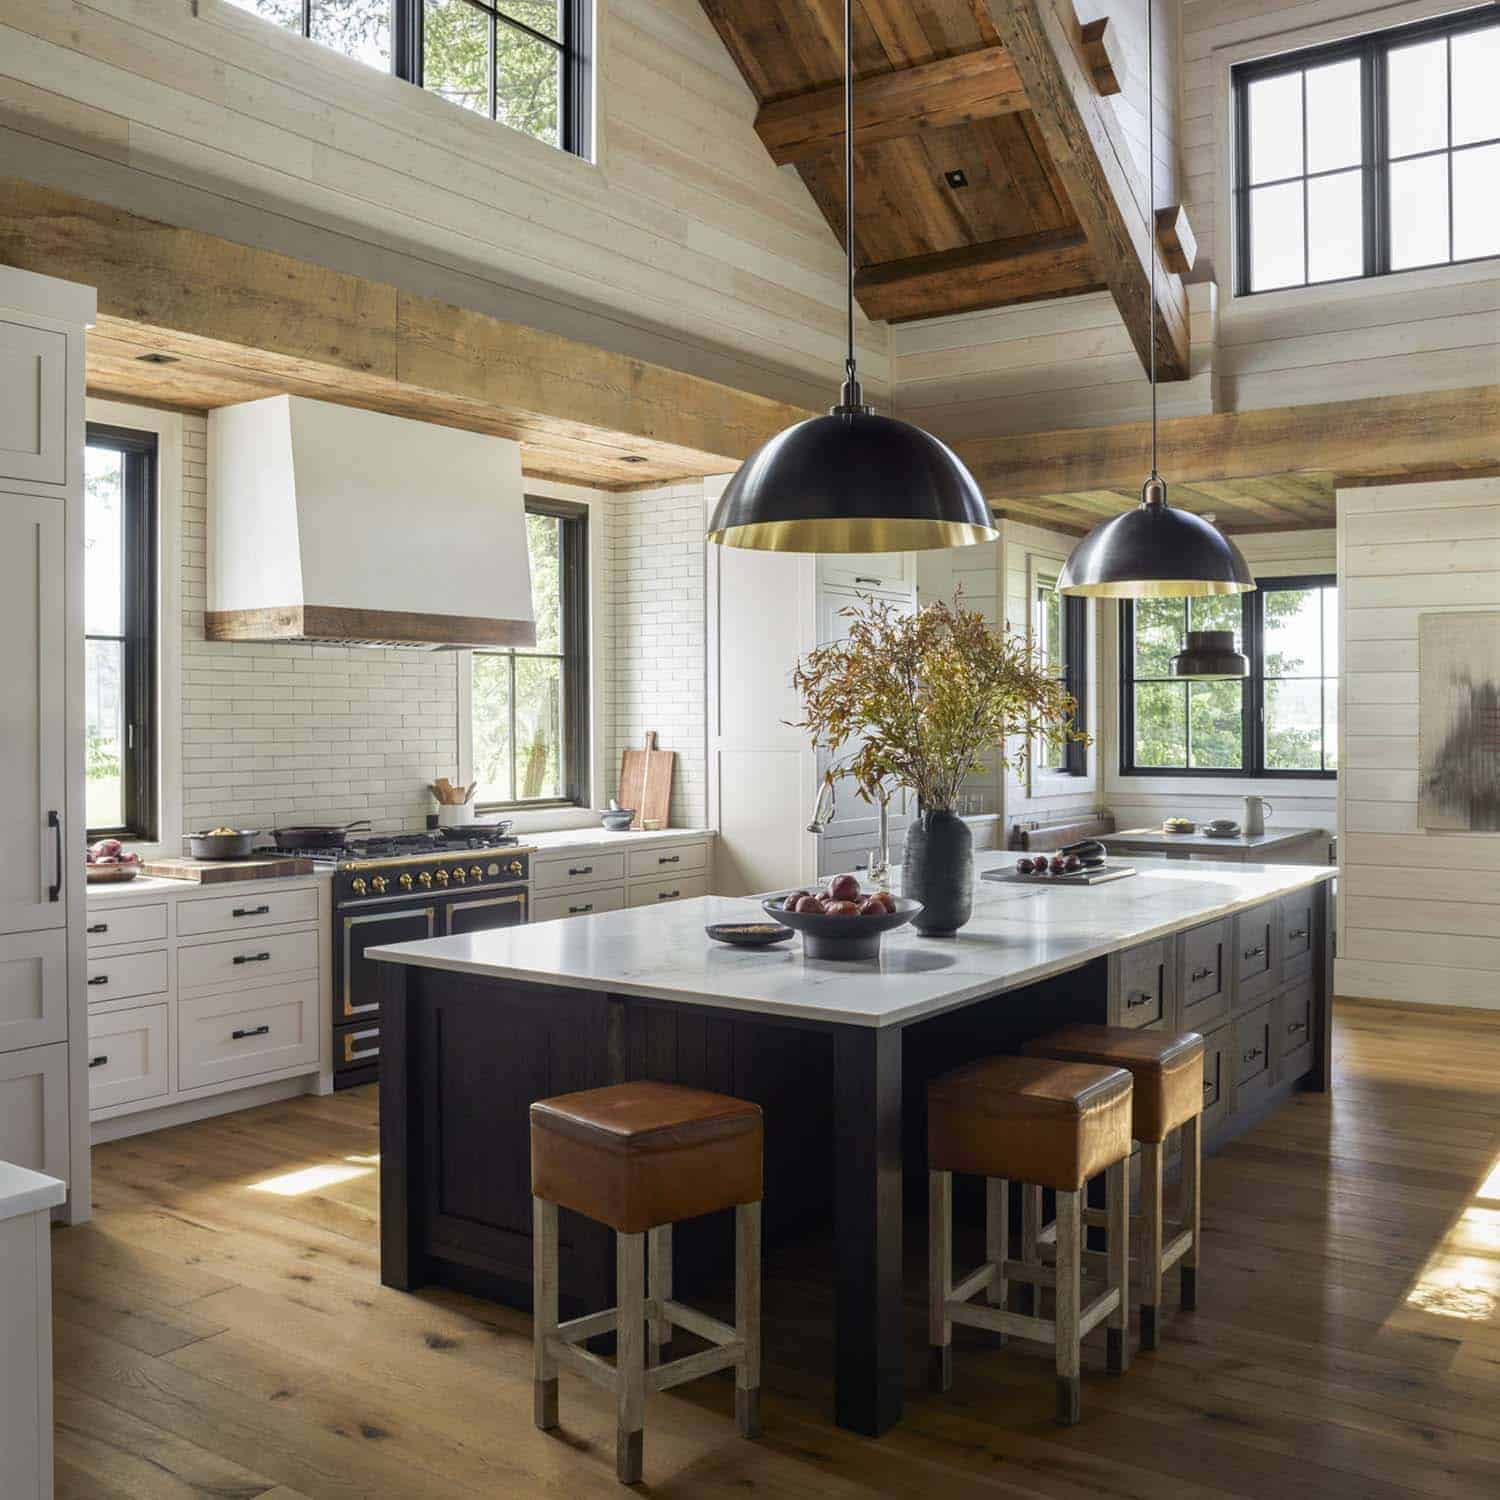 modern rustic kitchen with tall ceilings